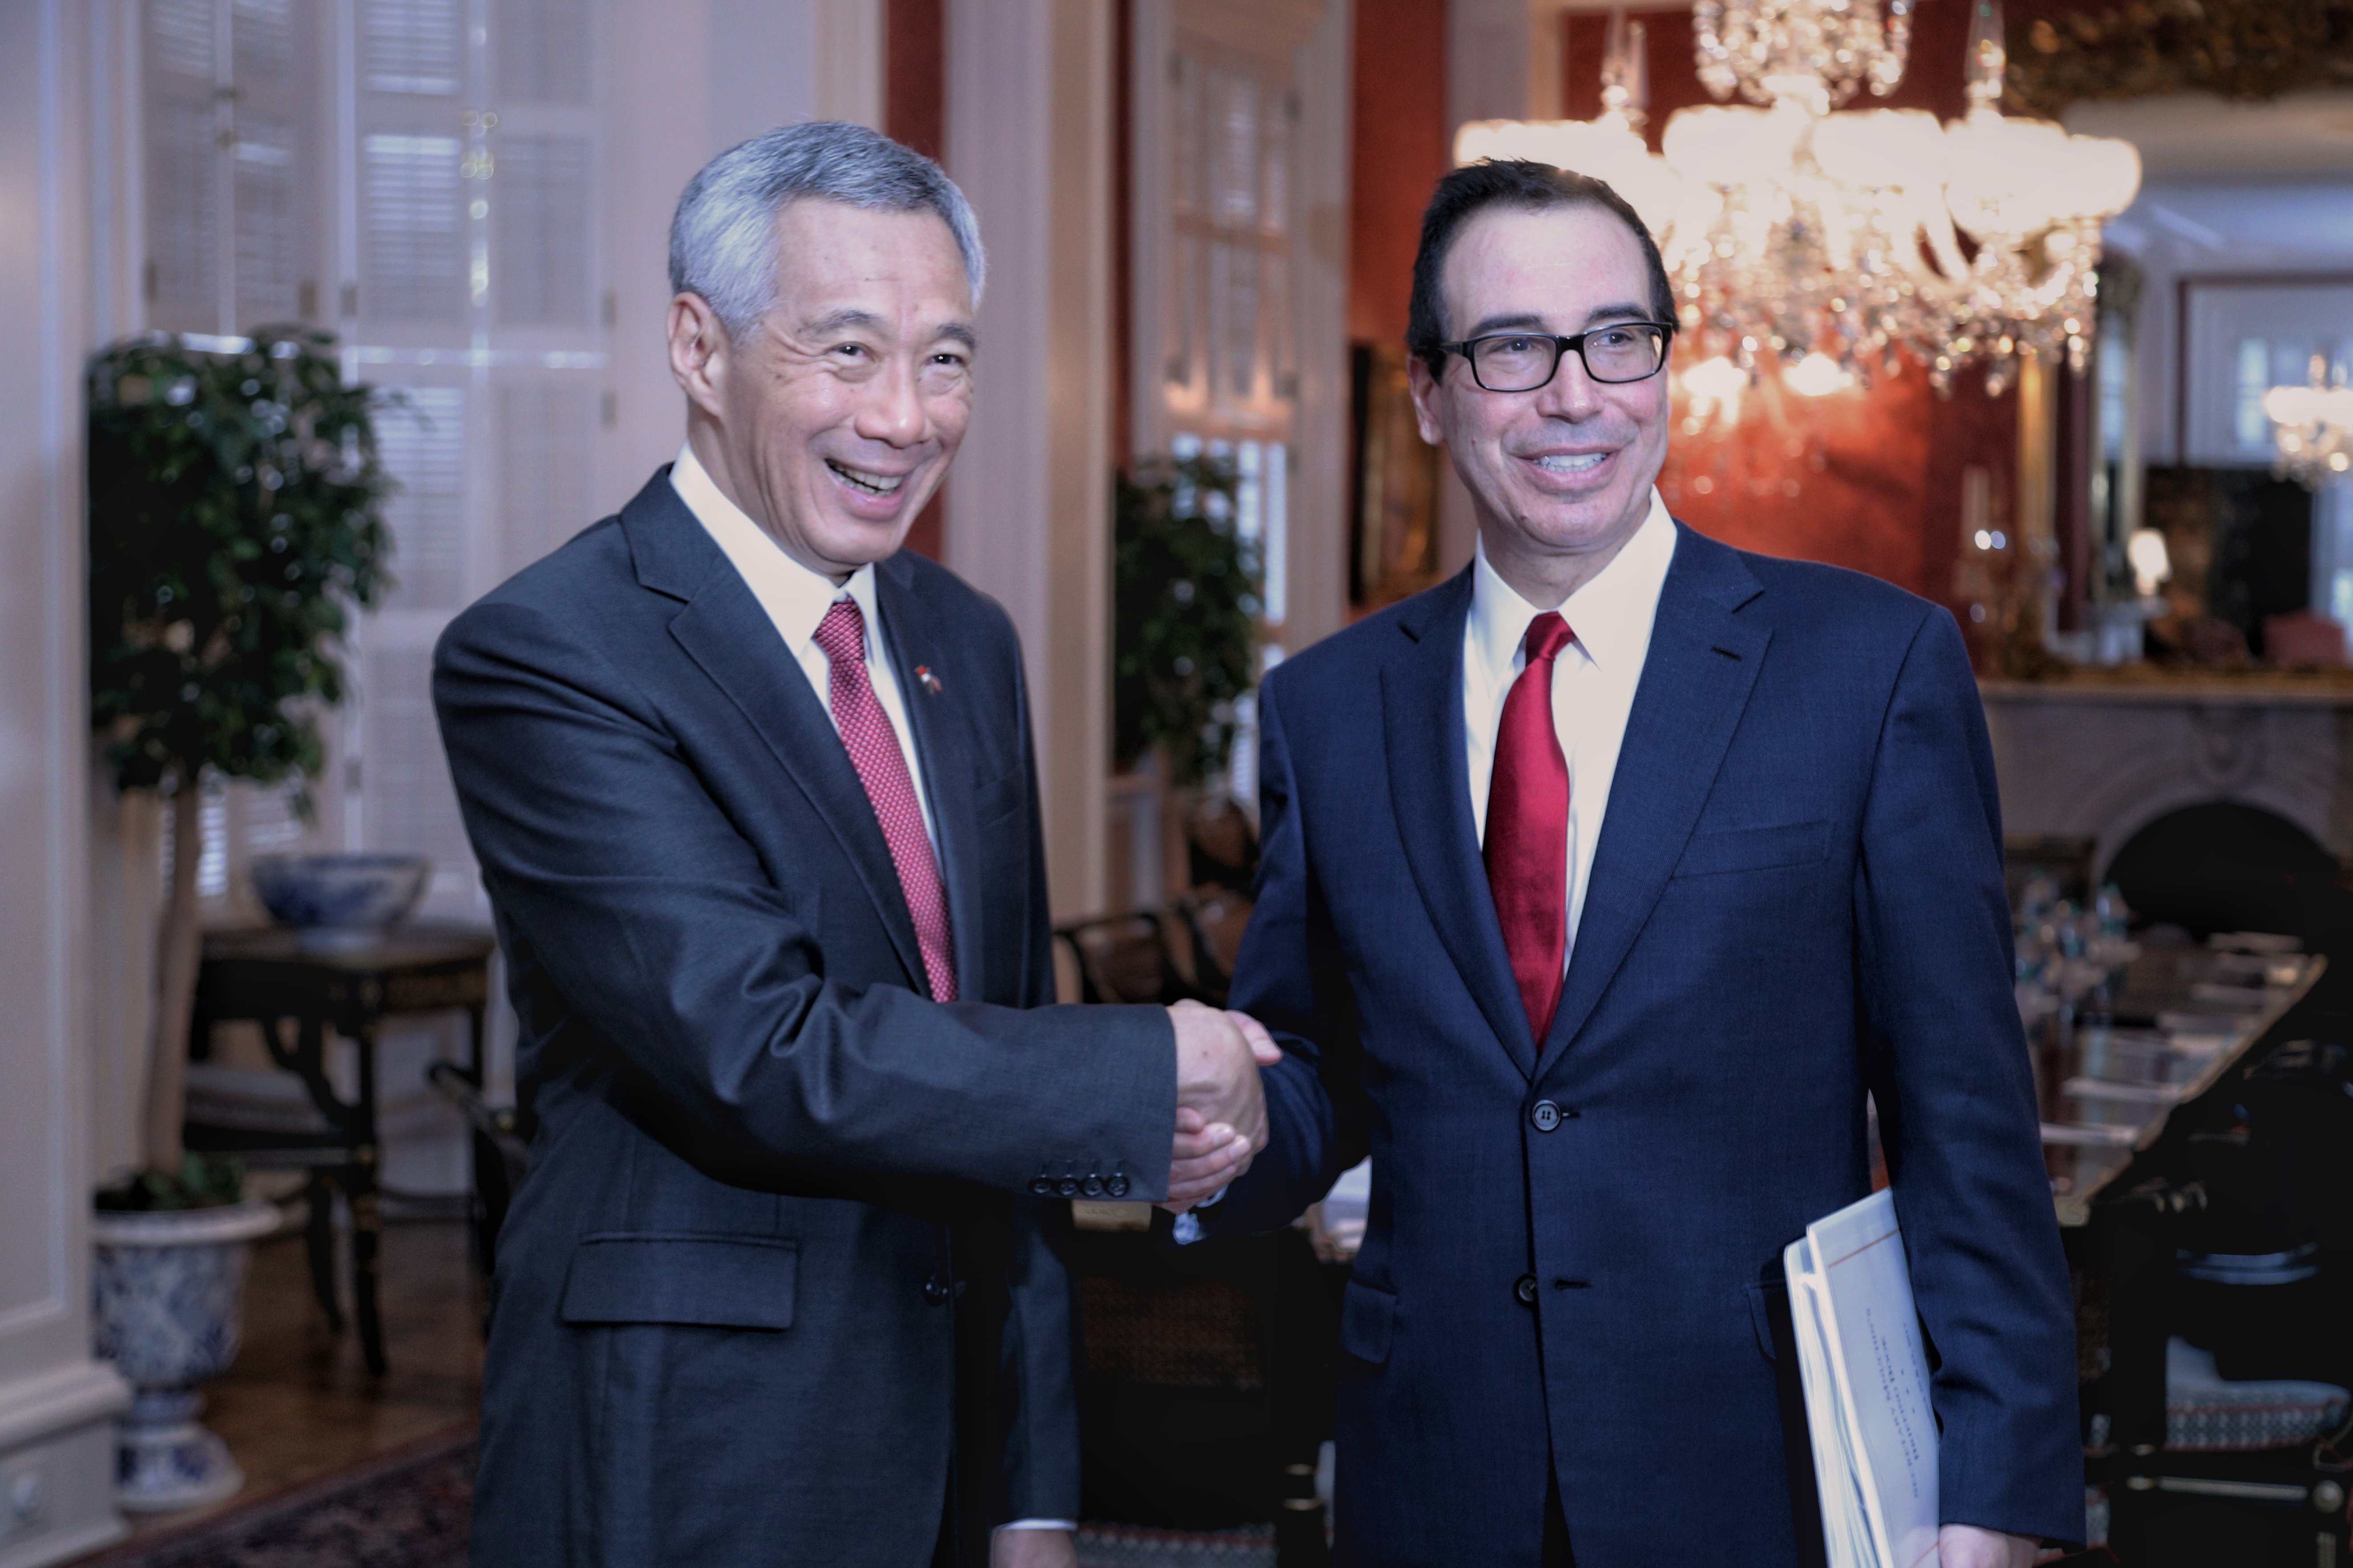 PM Lee Hsien Loong meeting with Secretary of the Treasury Steve Mnuchin on 23 Oct 2017 (MCI Photo by Kenji Soon)